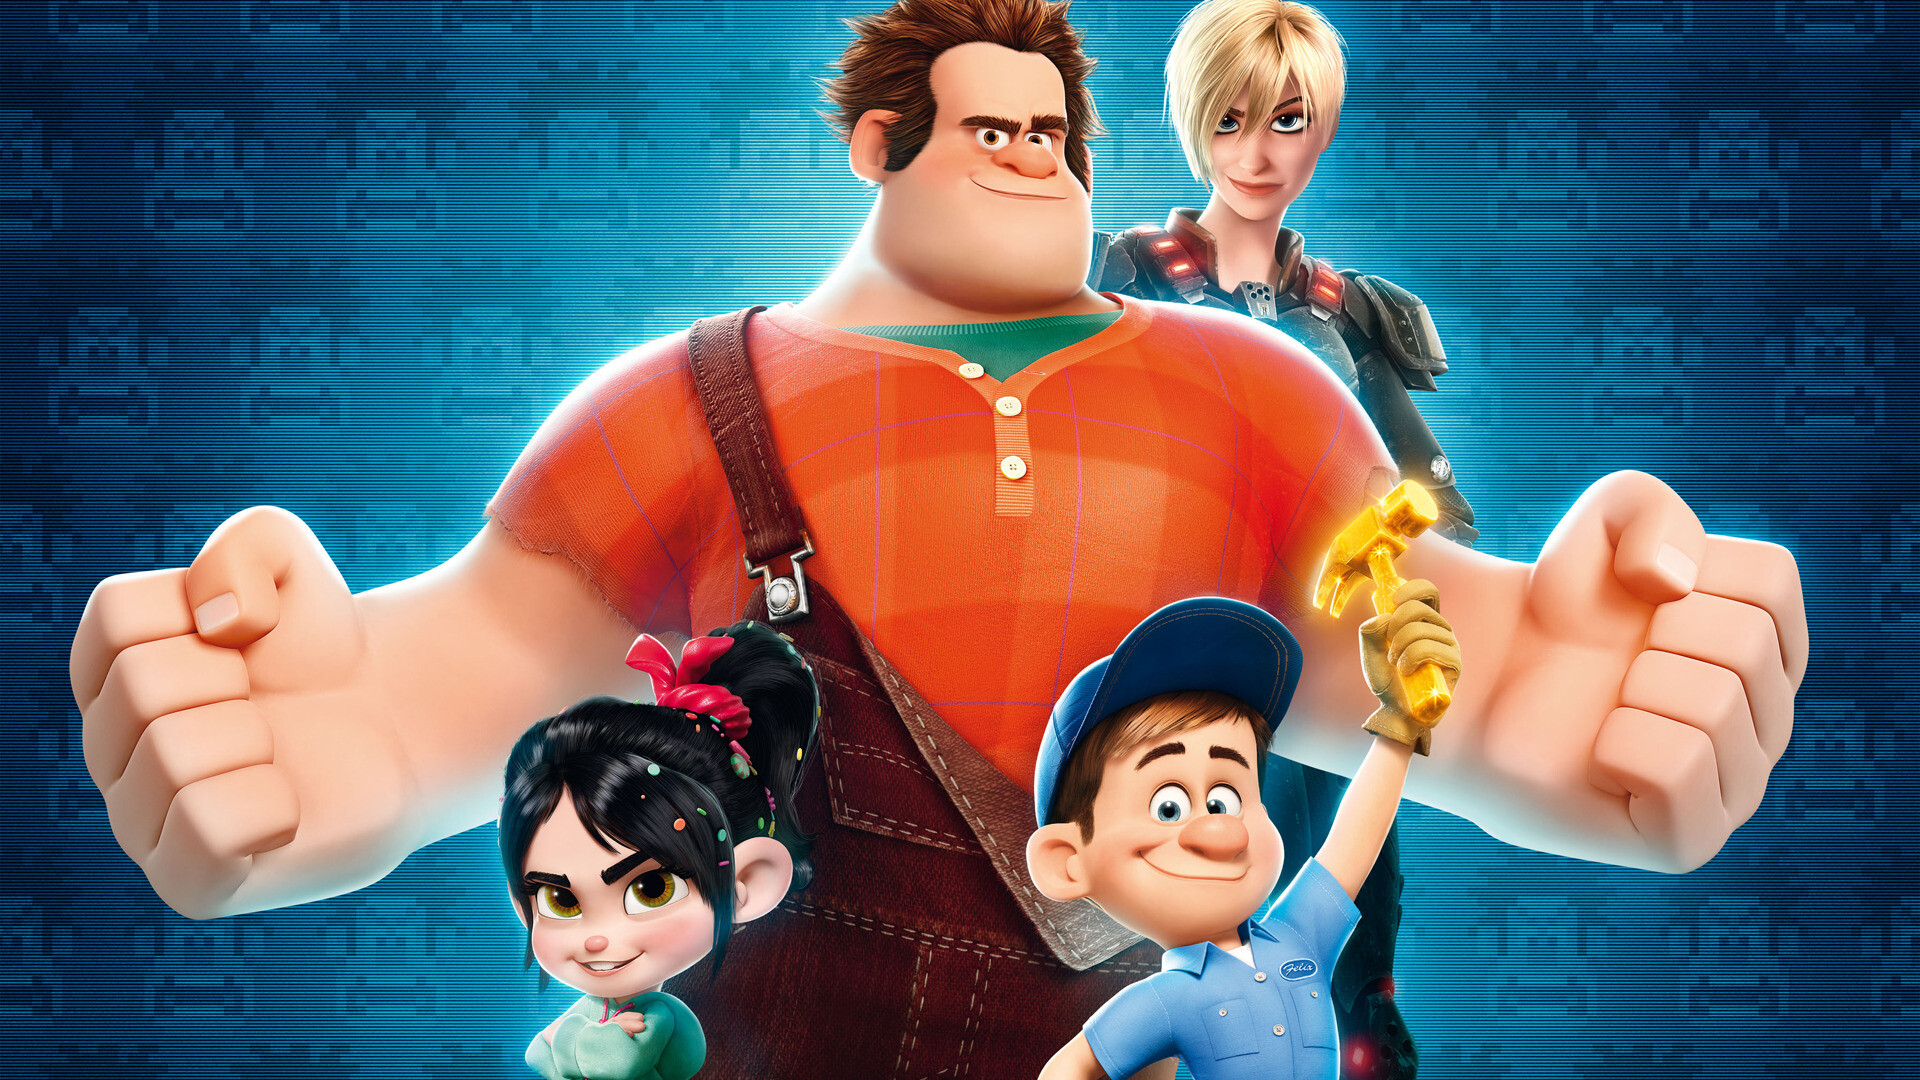 Wreck-It Ralph: The 52nd animated film from Disney's canon line-up, directed by Rich Moore, former director on The Simpsons. 1920x1080 Full HD Background.